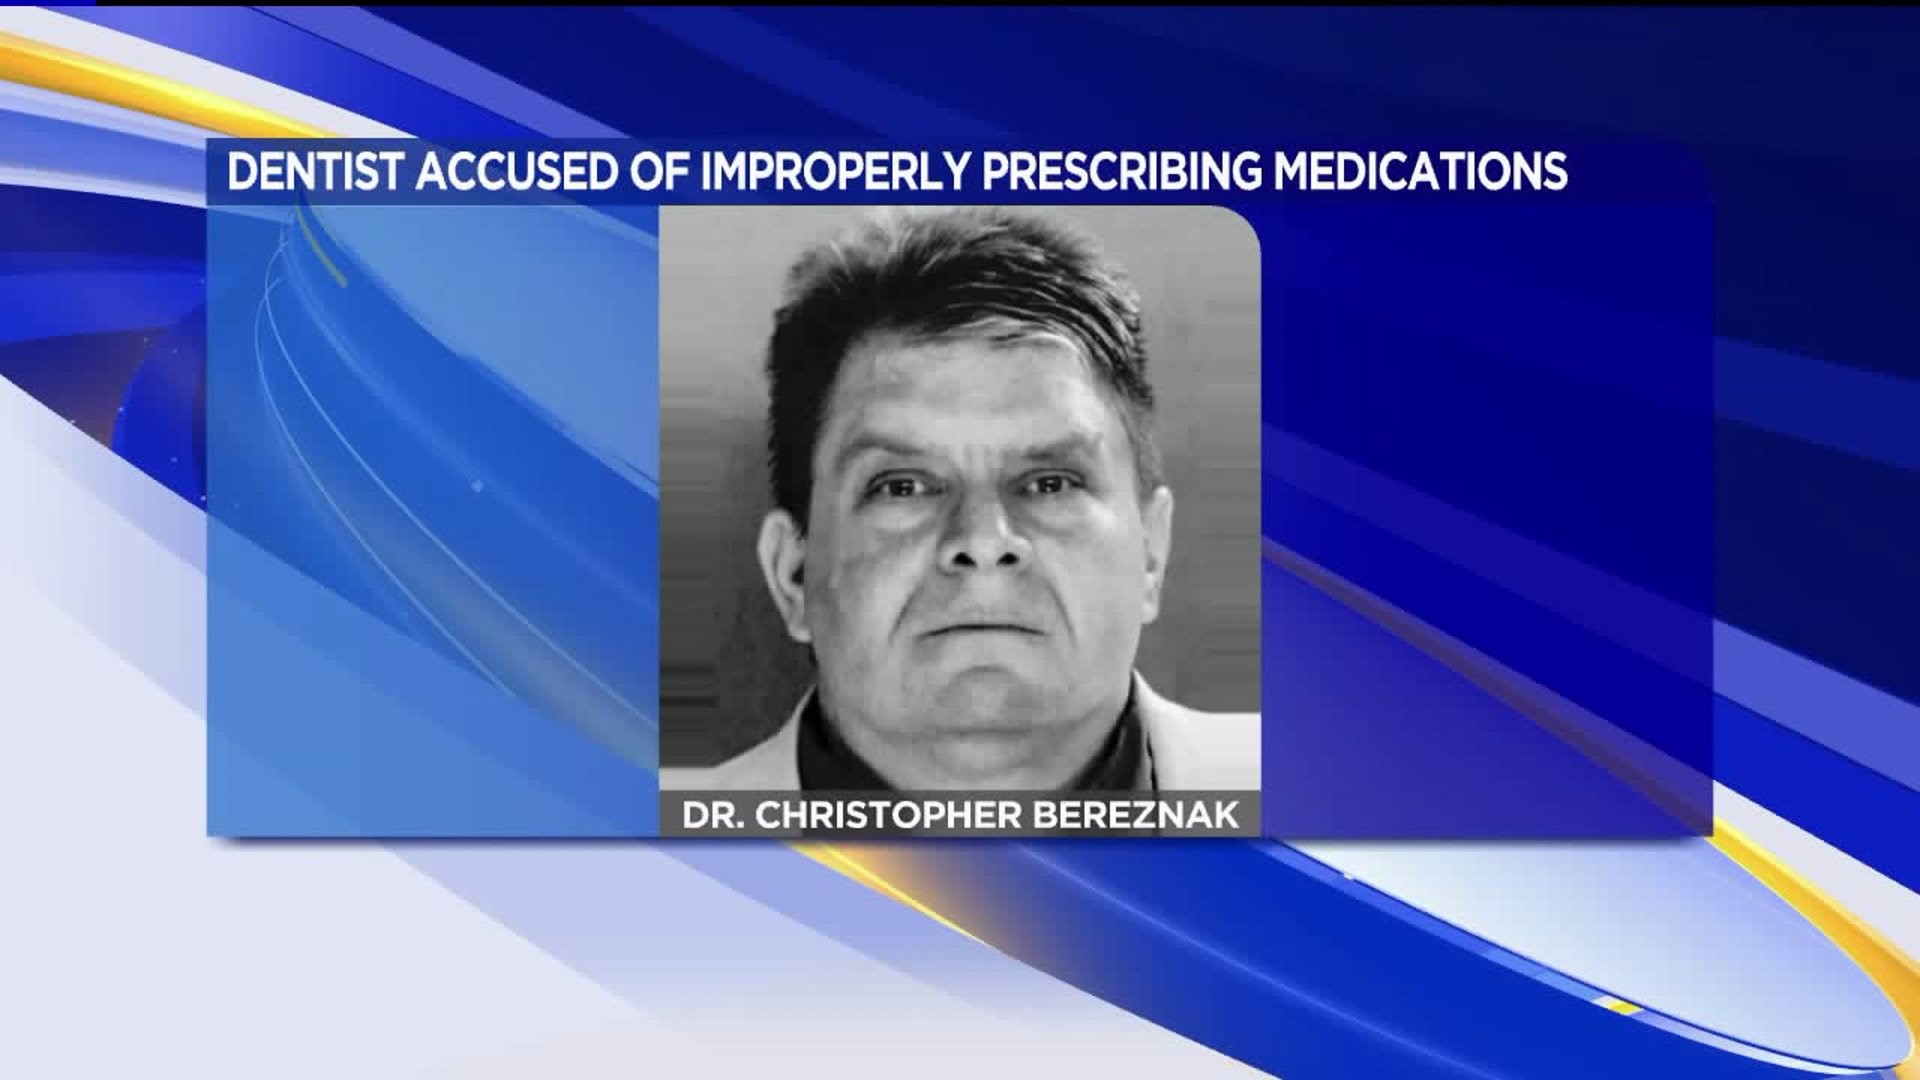 Dentist Facing Federal Charges After Allegedly Improperly Prescribing Medications